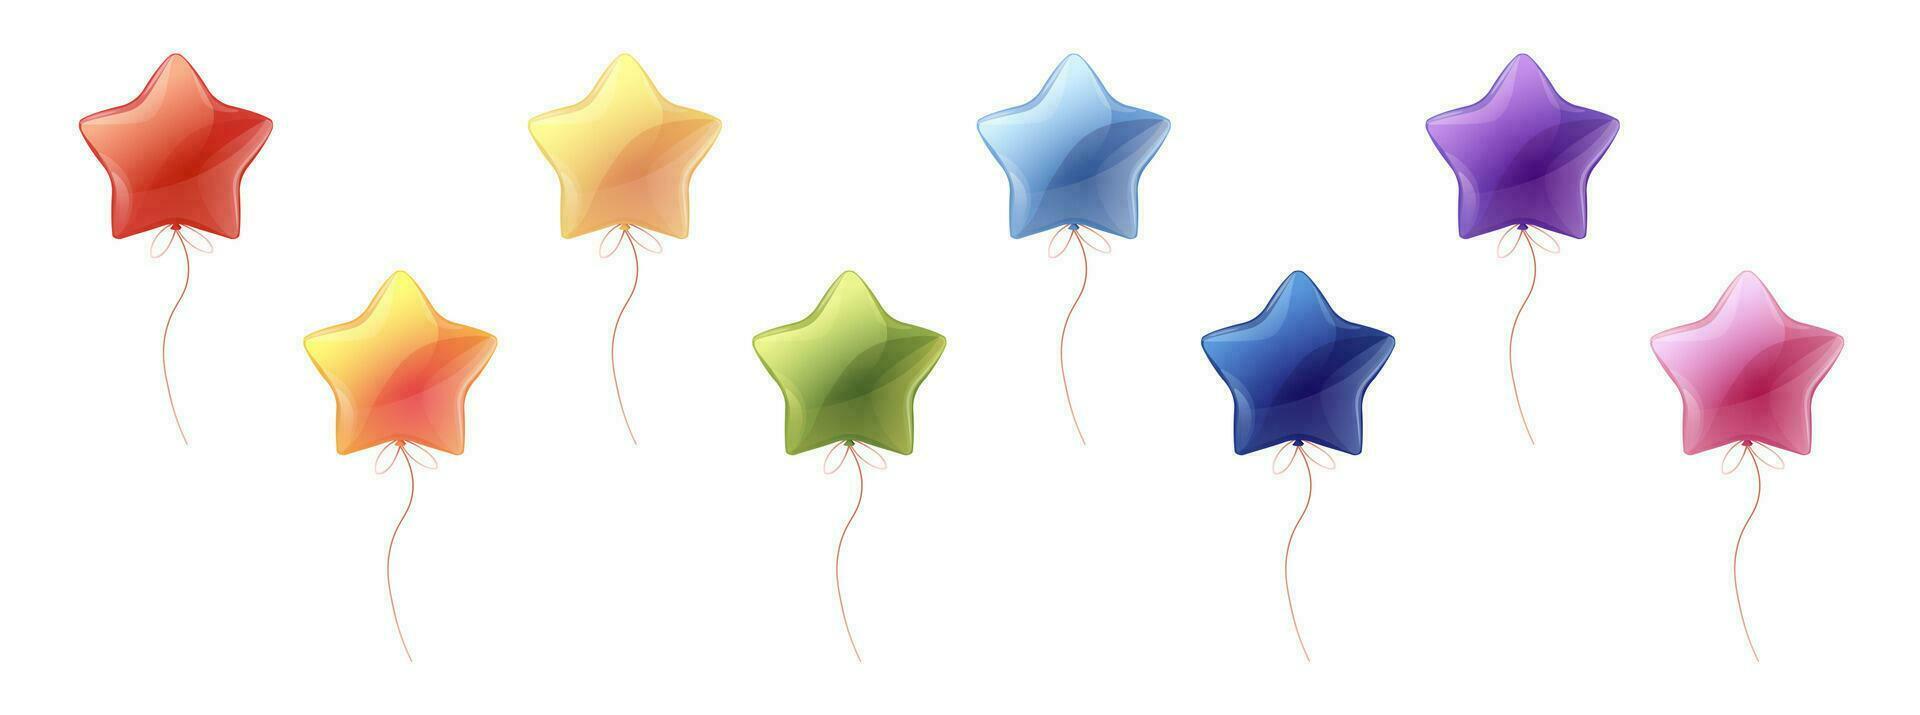 Set of balloons on isolated background. Cartoon style of colorful helium balloons in the shape of a star. Decor for birthdays, holidays, Christmas, etc. vector